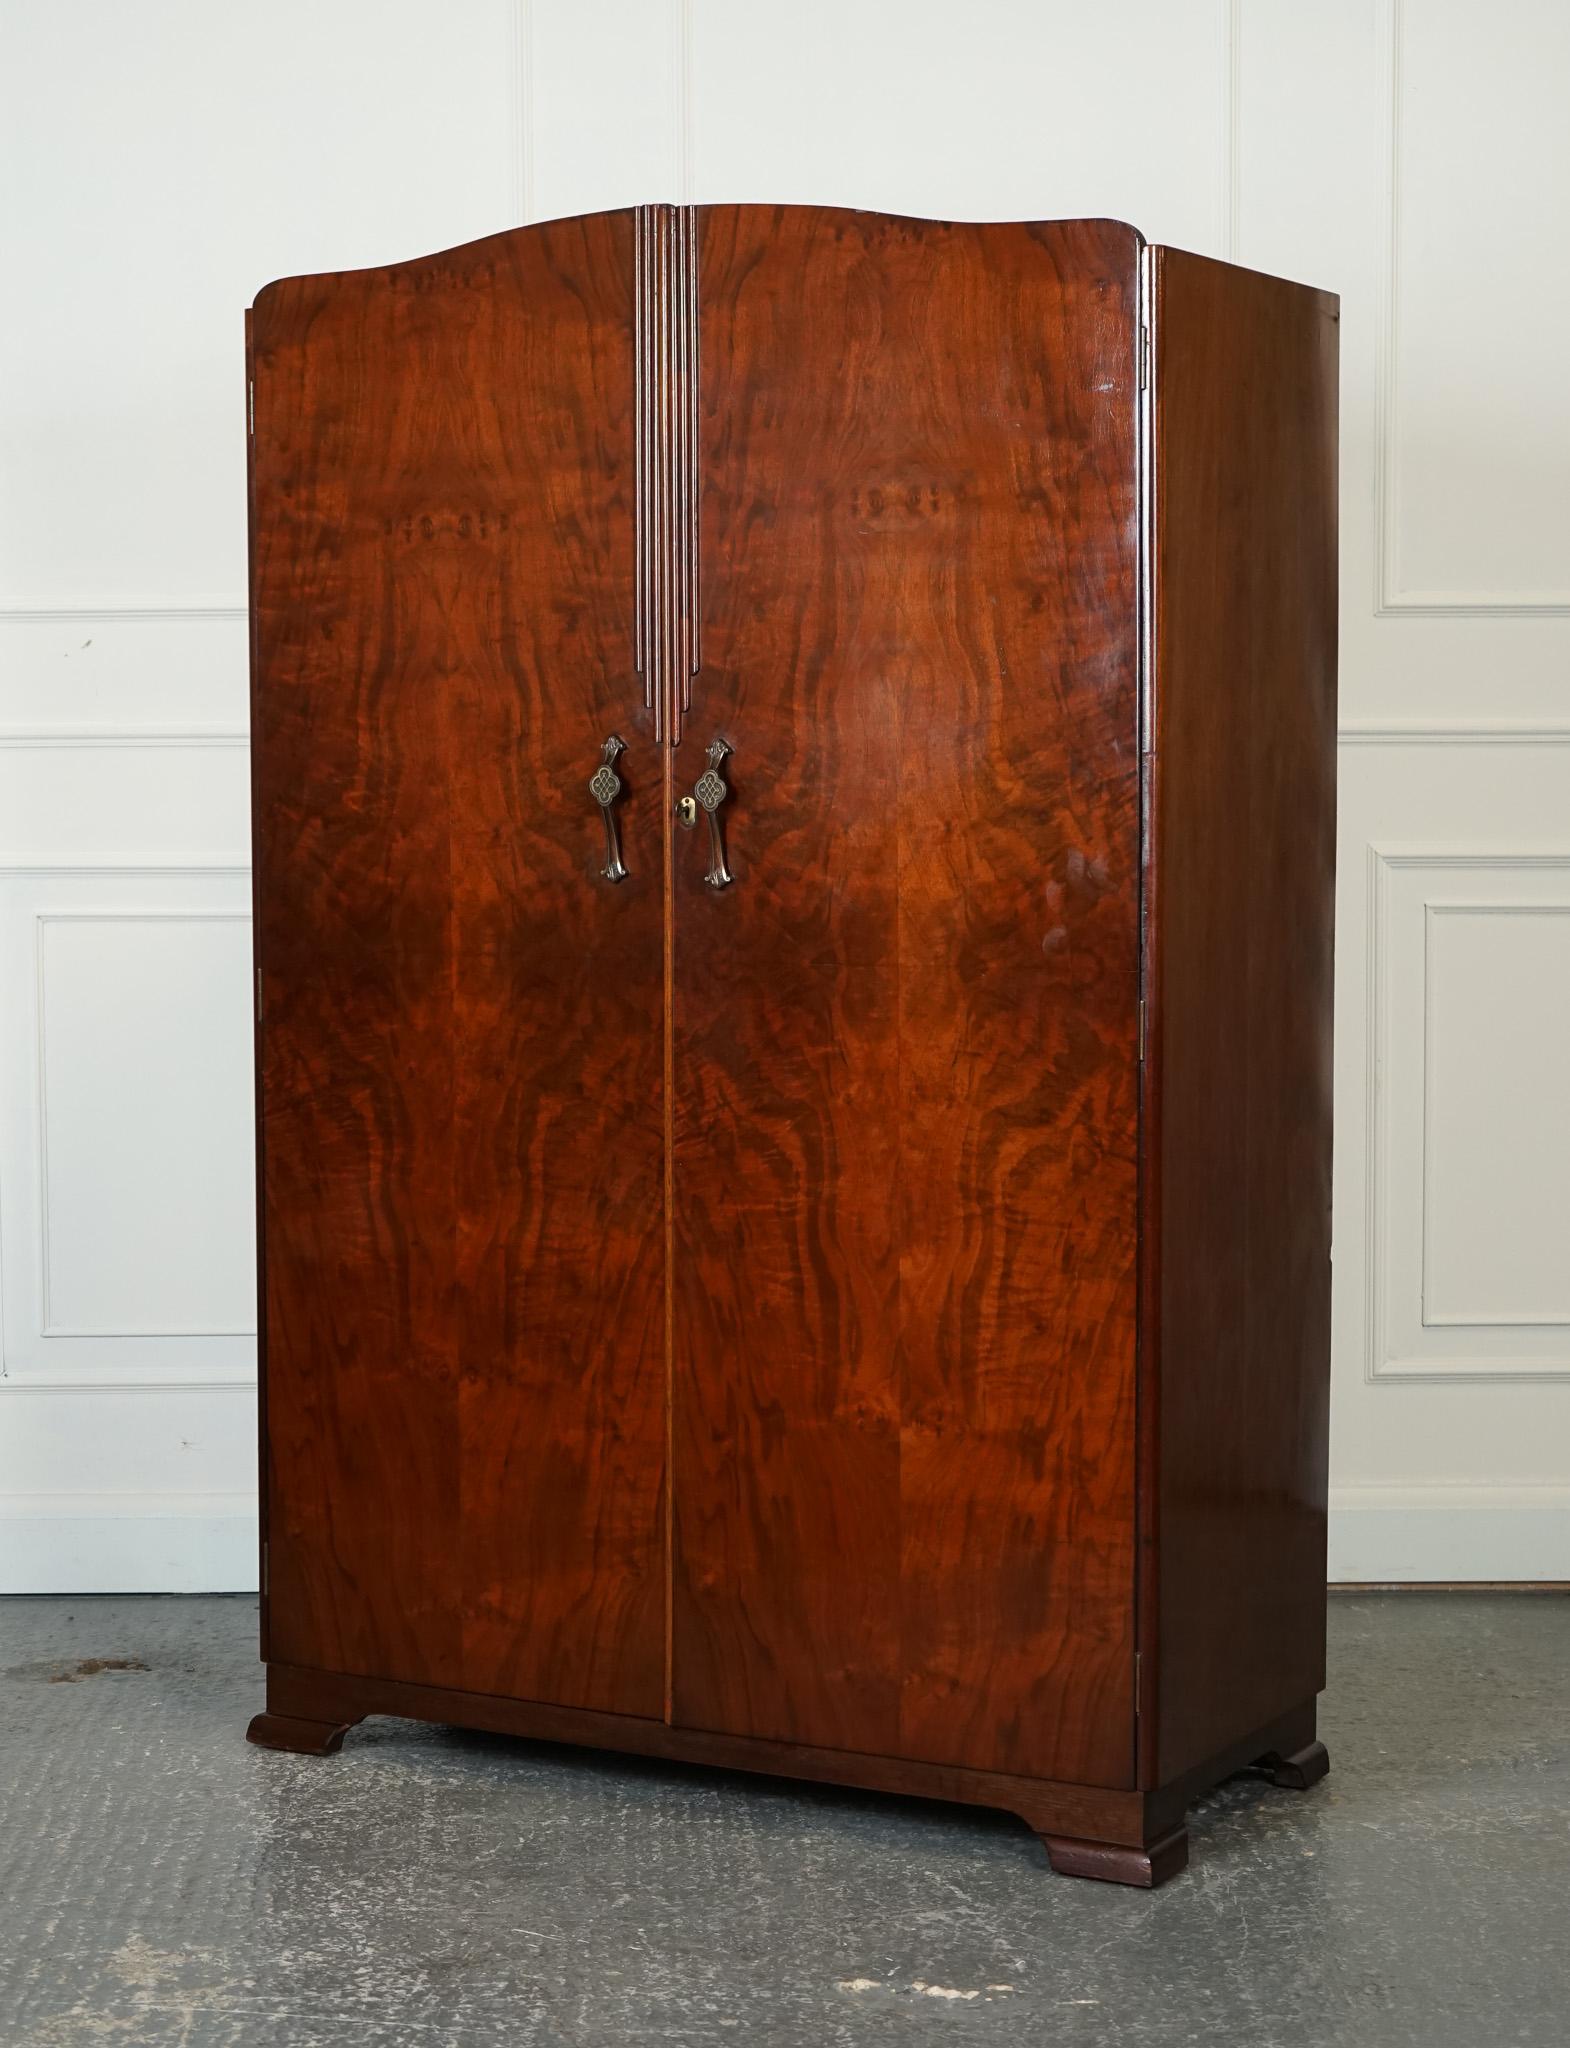 
We are delighted to offer for sale this Lovely Art Deco Burr Hardwood Vintage Double Wardrobe.

The Lovely Vintage 1920's Art Deco Style Wardrobe is a stunning piece of furniture that will instantly transport you back in time to the glamorous